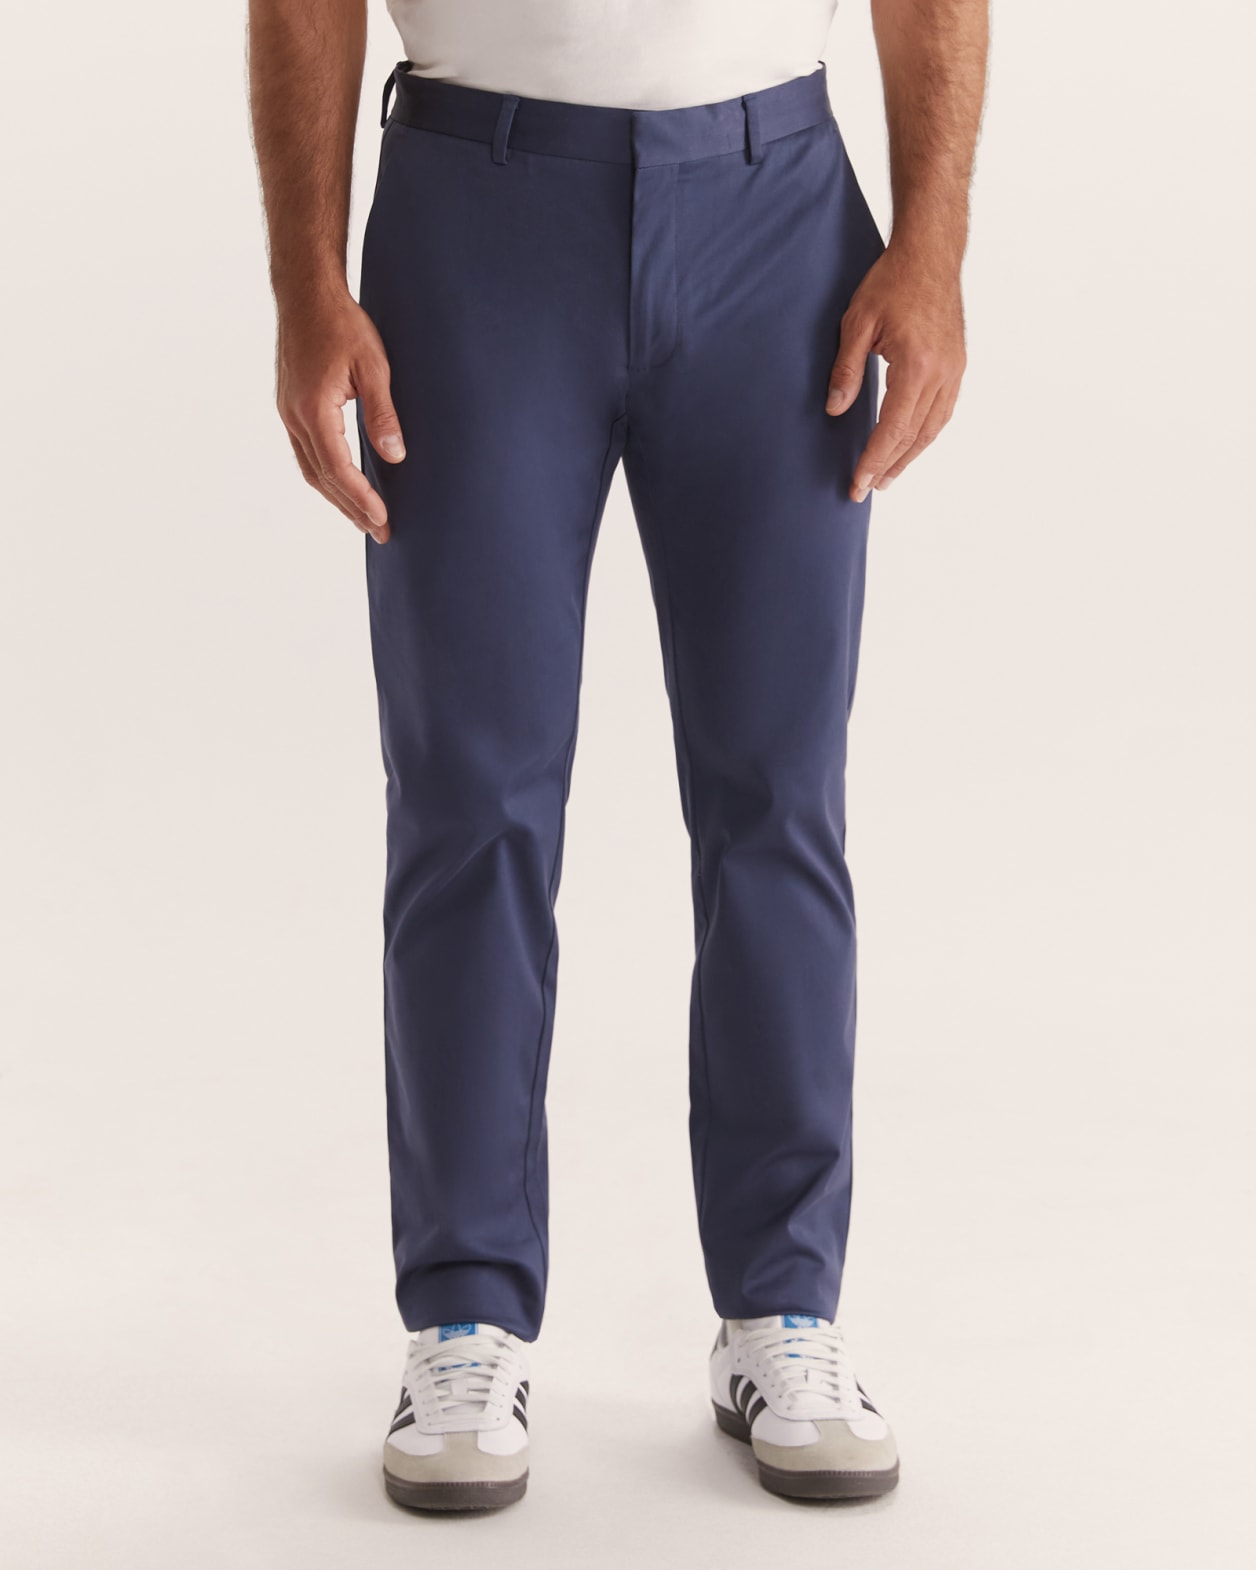 Baxter Slim Chino Pant in DUSK BLUE